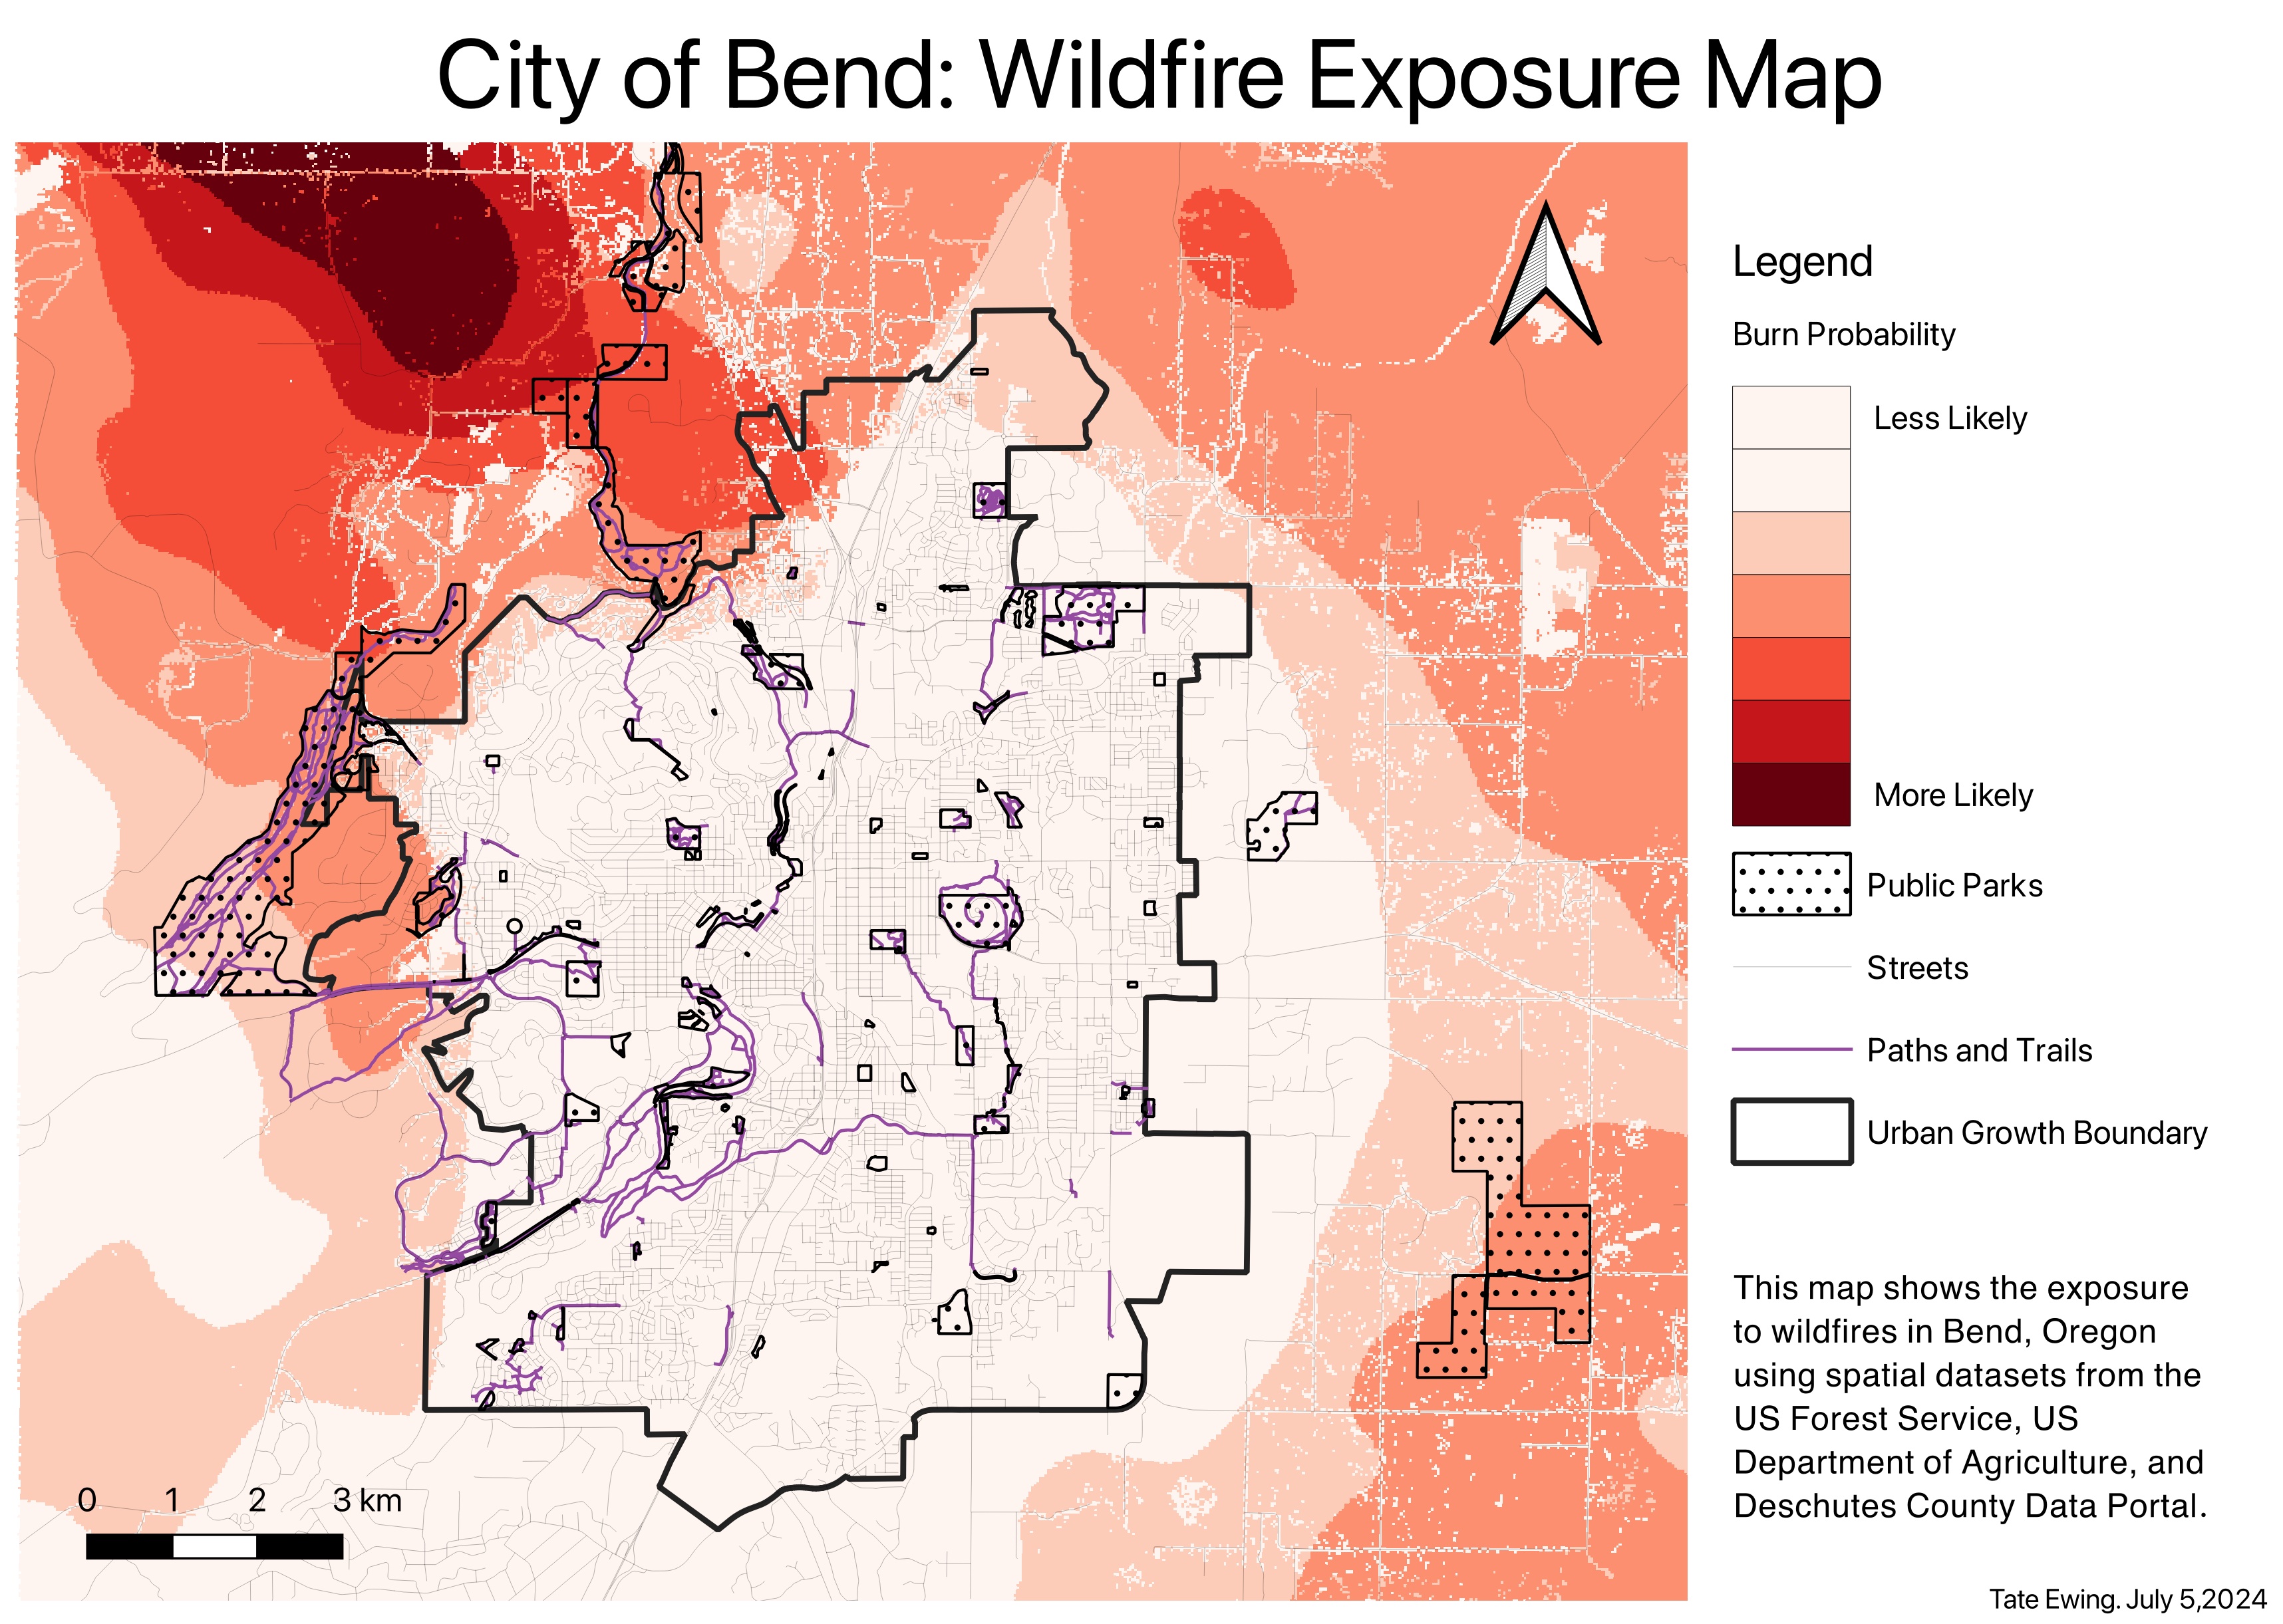 City of Bend, OR: Wildfire Exposure Map